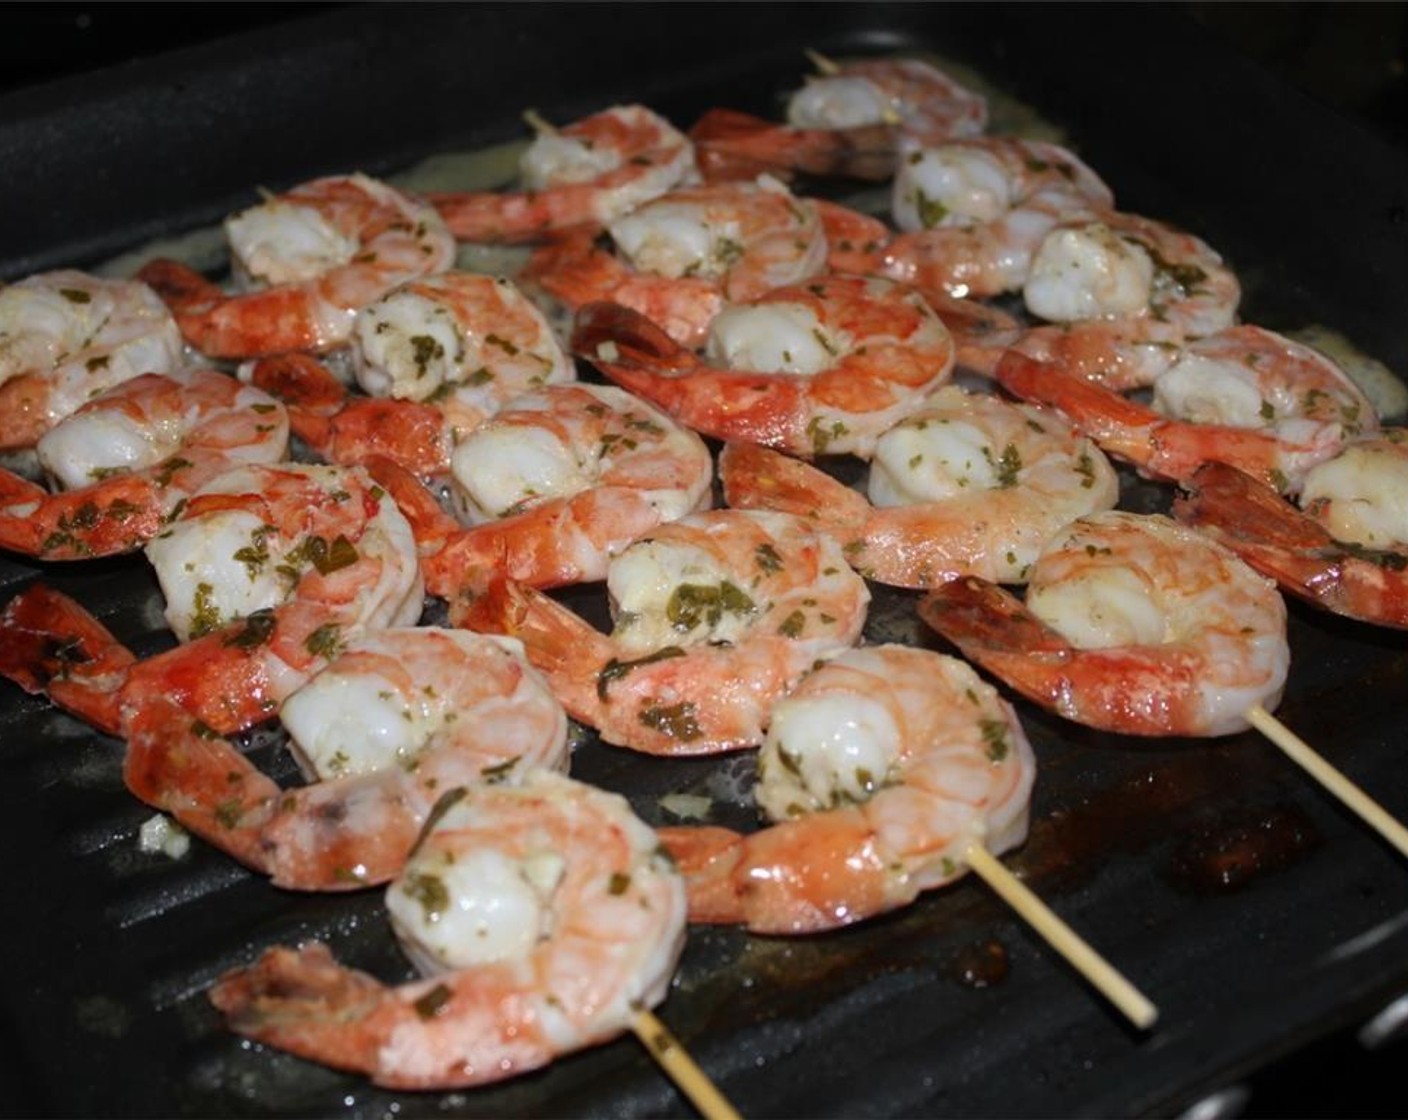 step 8 When your shrimp has finished marinating, remove your skewers from the fridge. Heat the grill/grill pan over high heat. When hot, add the shrimp skewers and cook for 1½-2 minutes on each side until the shrimp become pink and opaque.